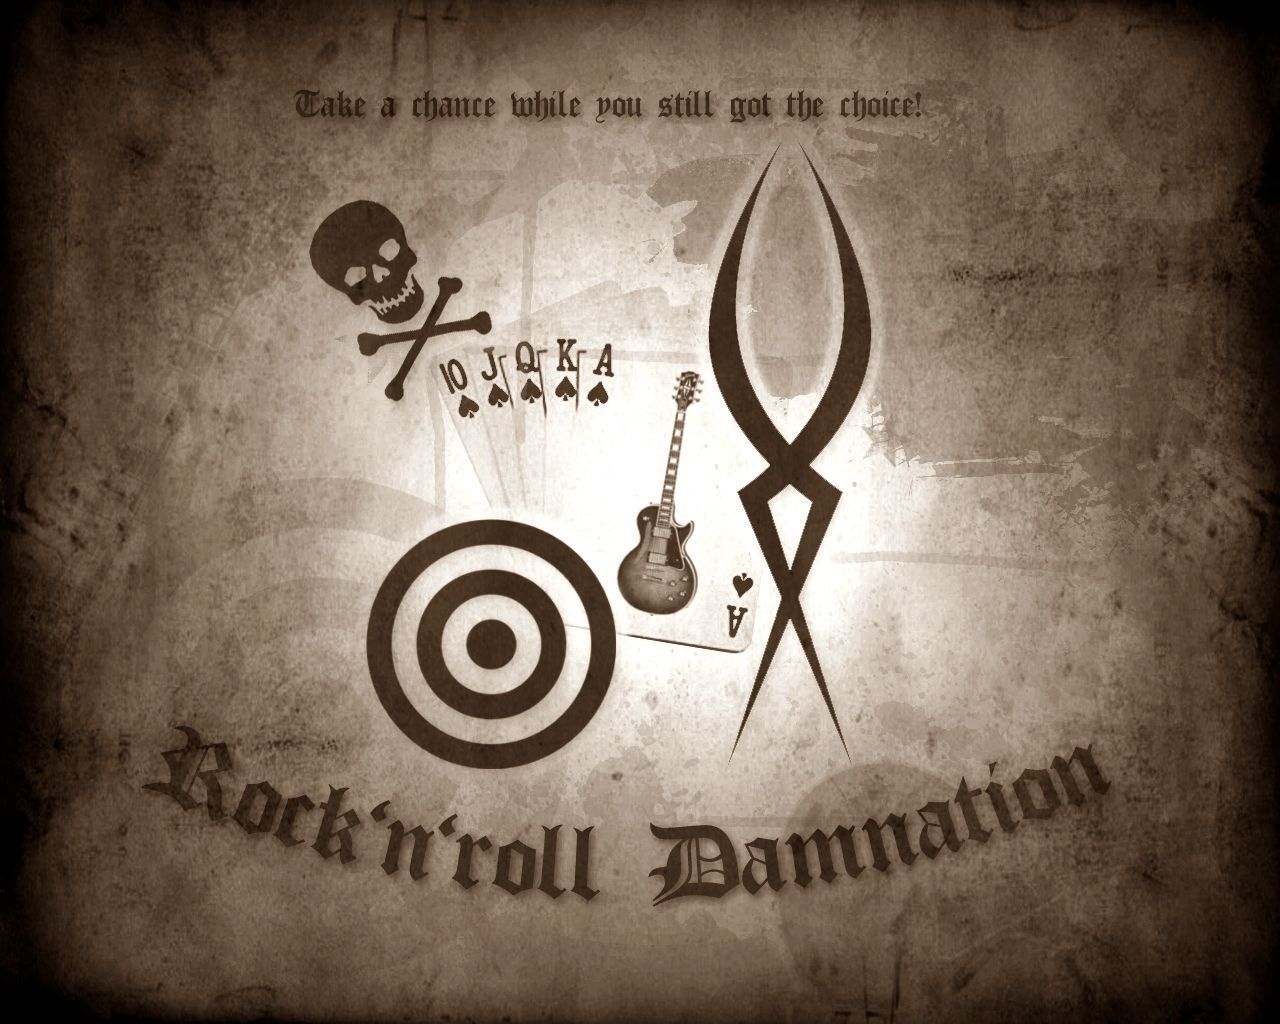 1 Rock'n'roll Damnation HD Wallpapers | Backgrounds - Wallpaper Abyss